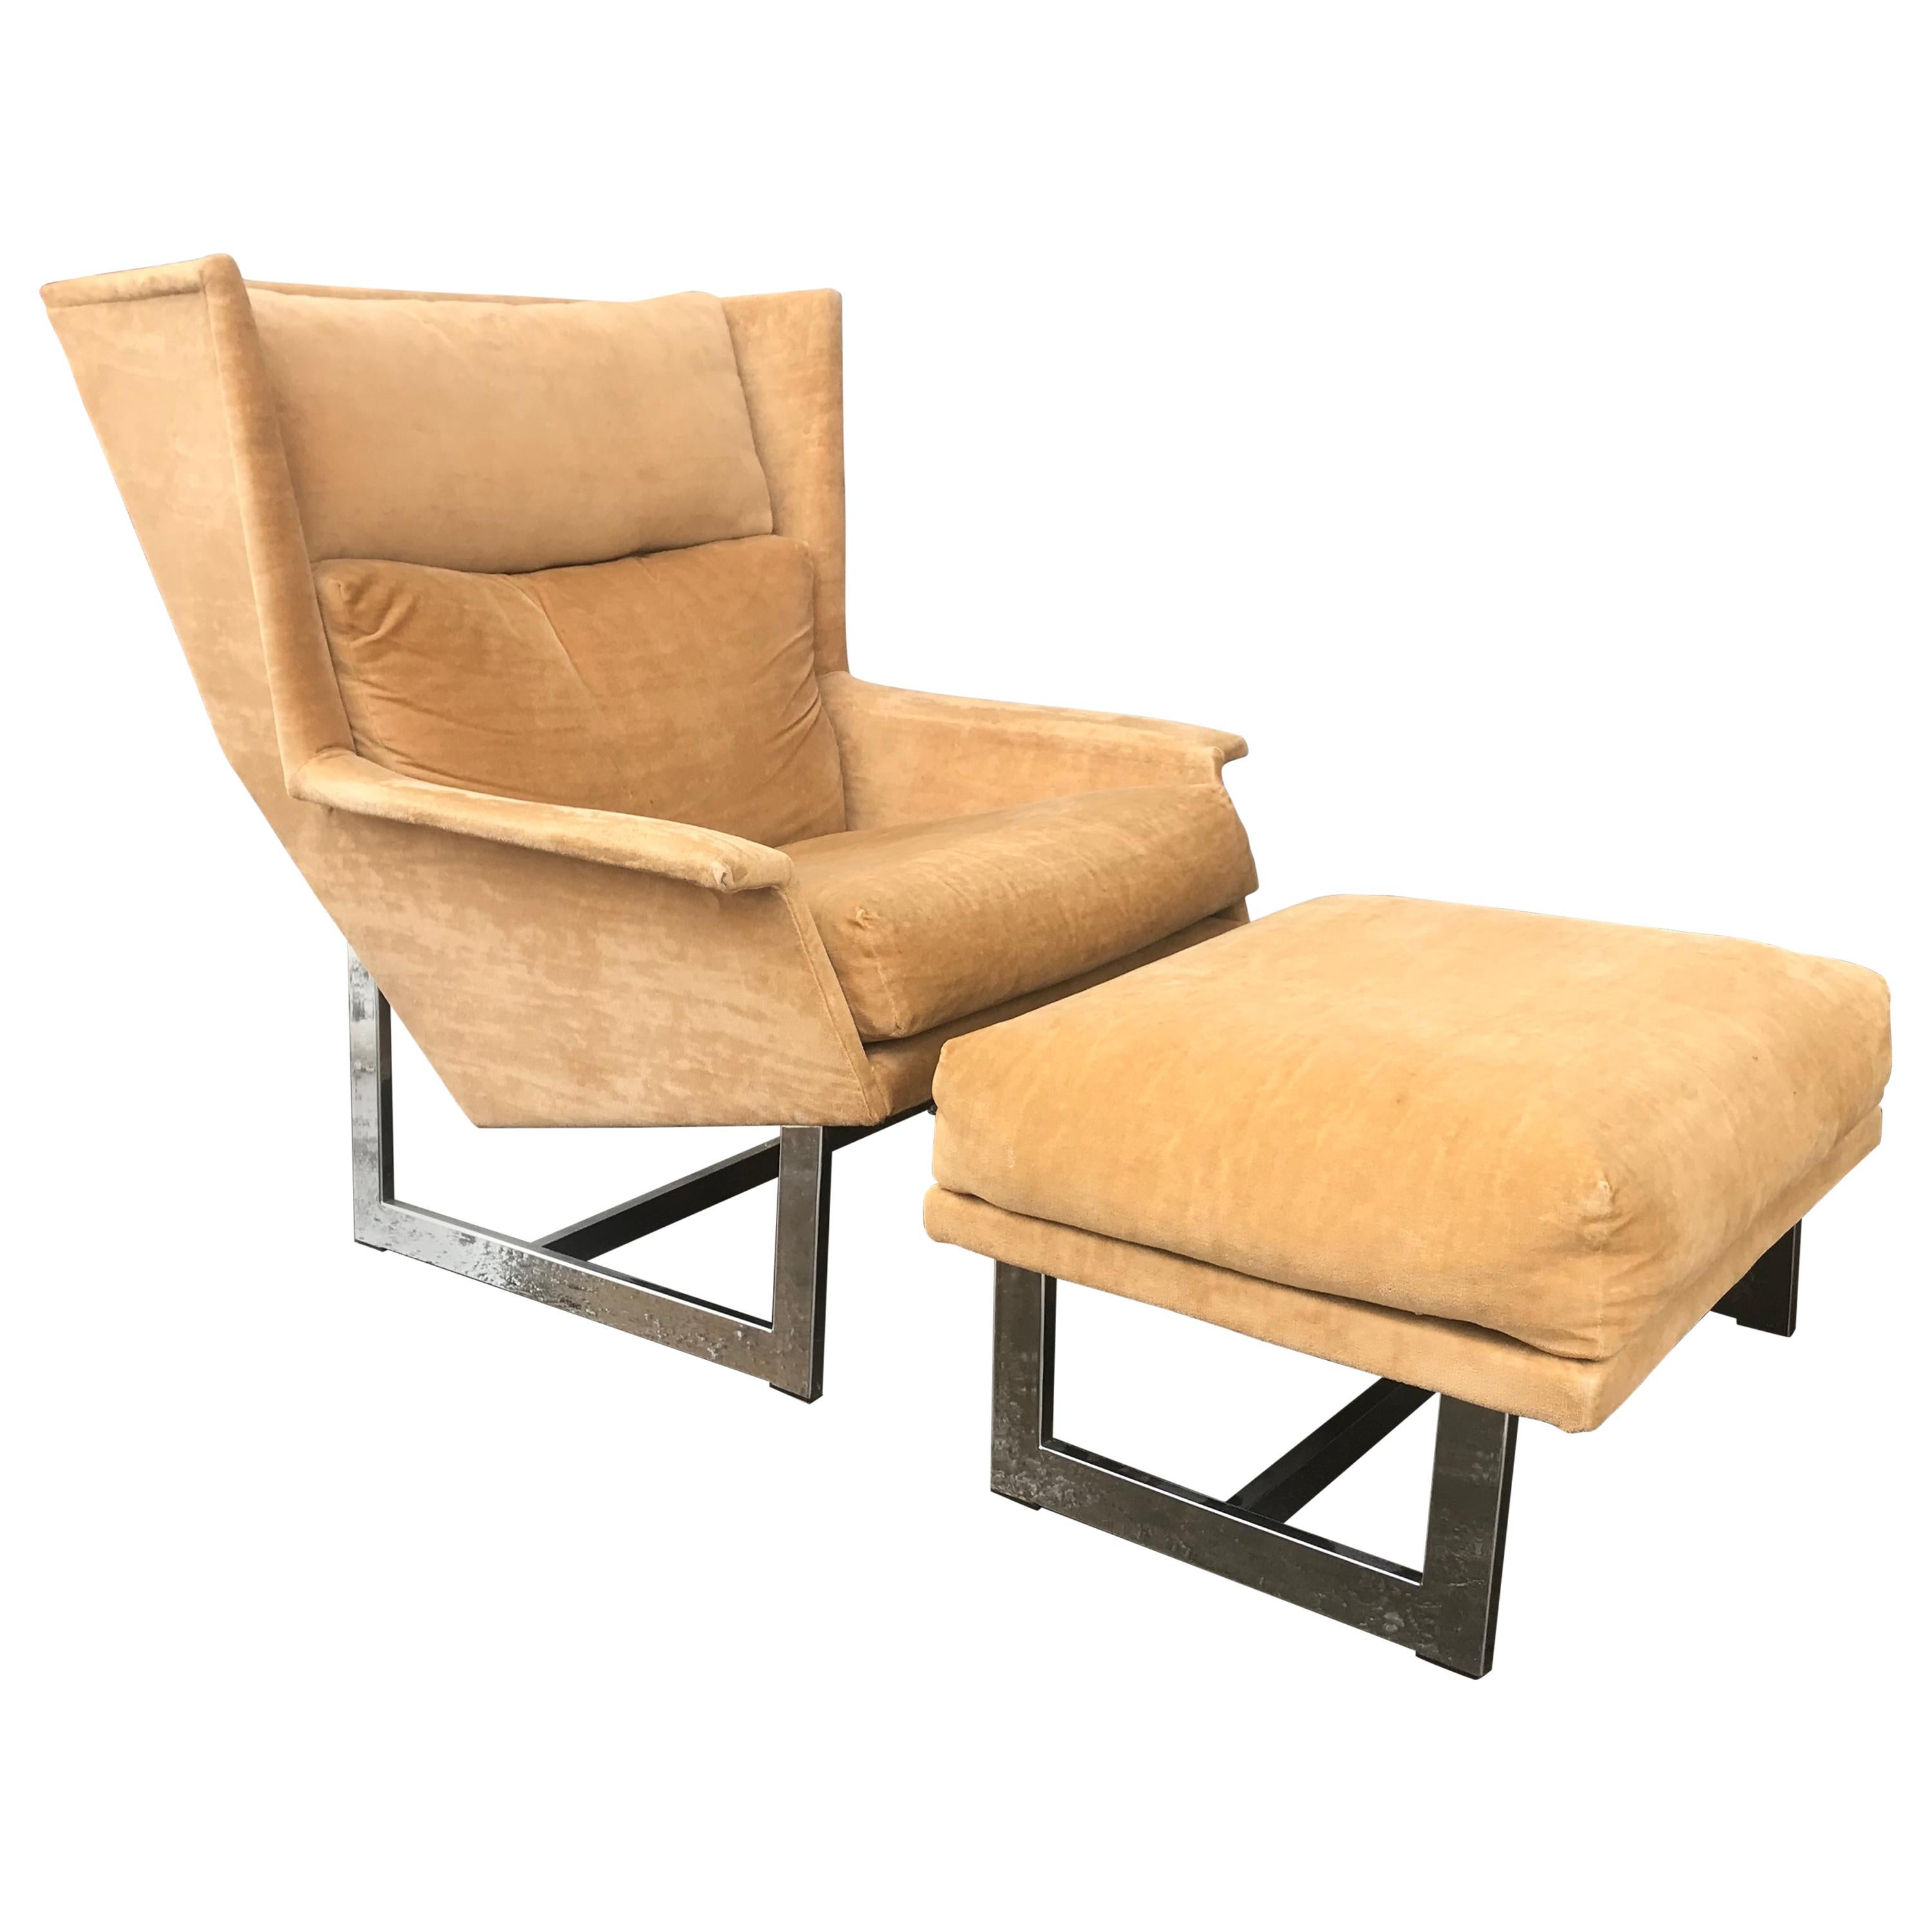 Pair of Adrian Pearsall Lounge Chairs / Ottomans, over Scale Dramatic Forms